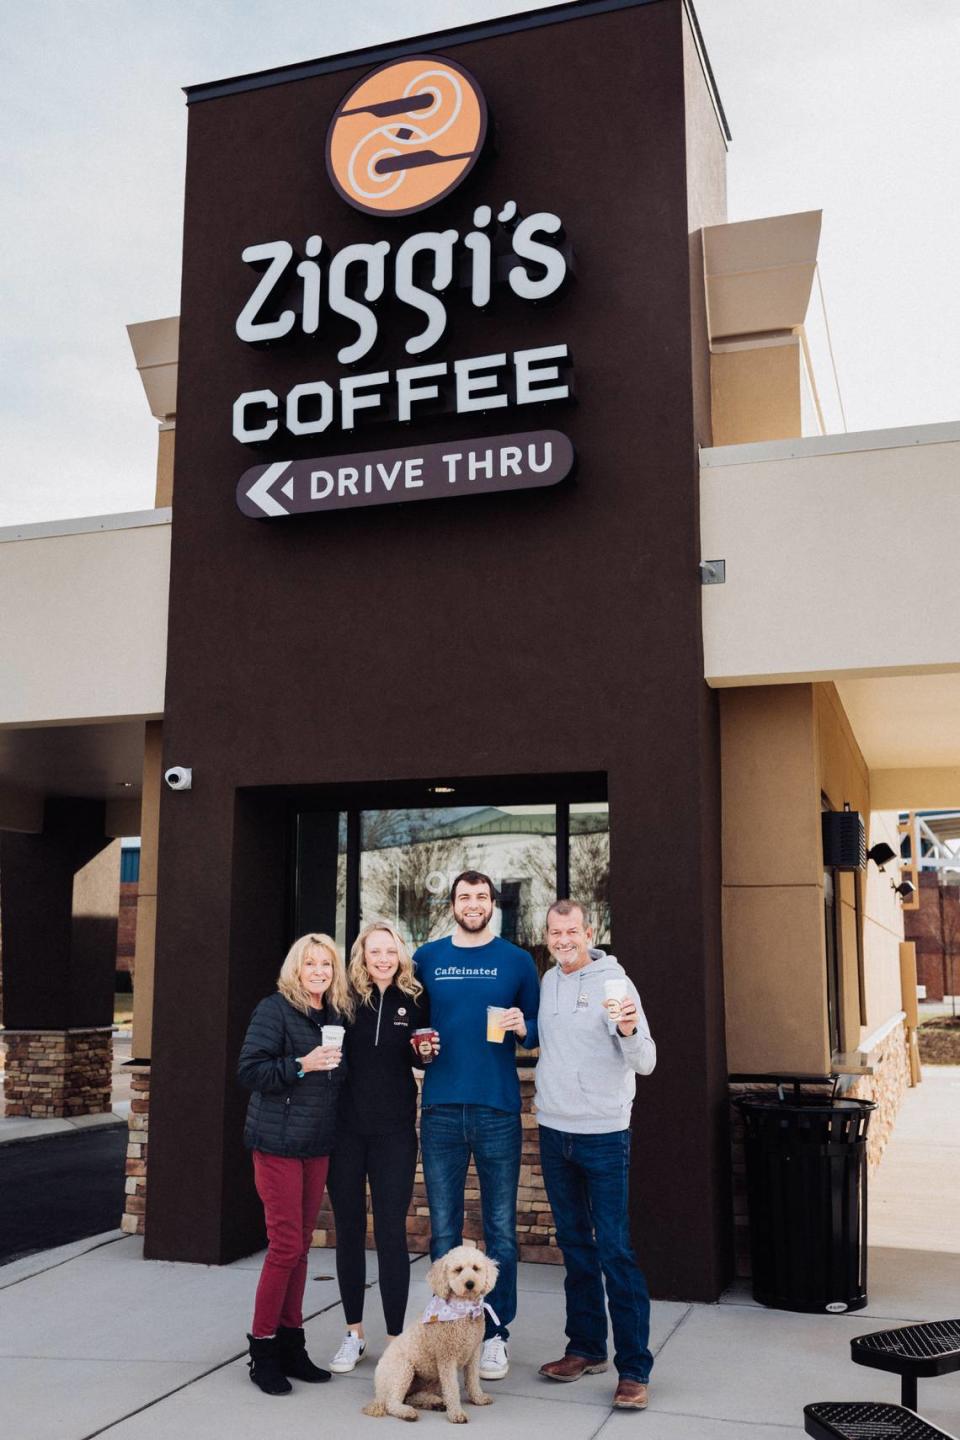 Ziggi’s Coffee owners John (far right) and Vicki Kemp (far left), with Austin and Mikaila Kemp (center), said they’re looking forward to opening their first shop in Clayton, the town they now call home.